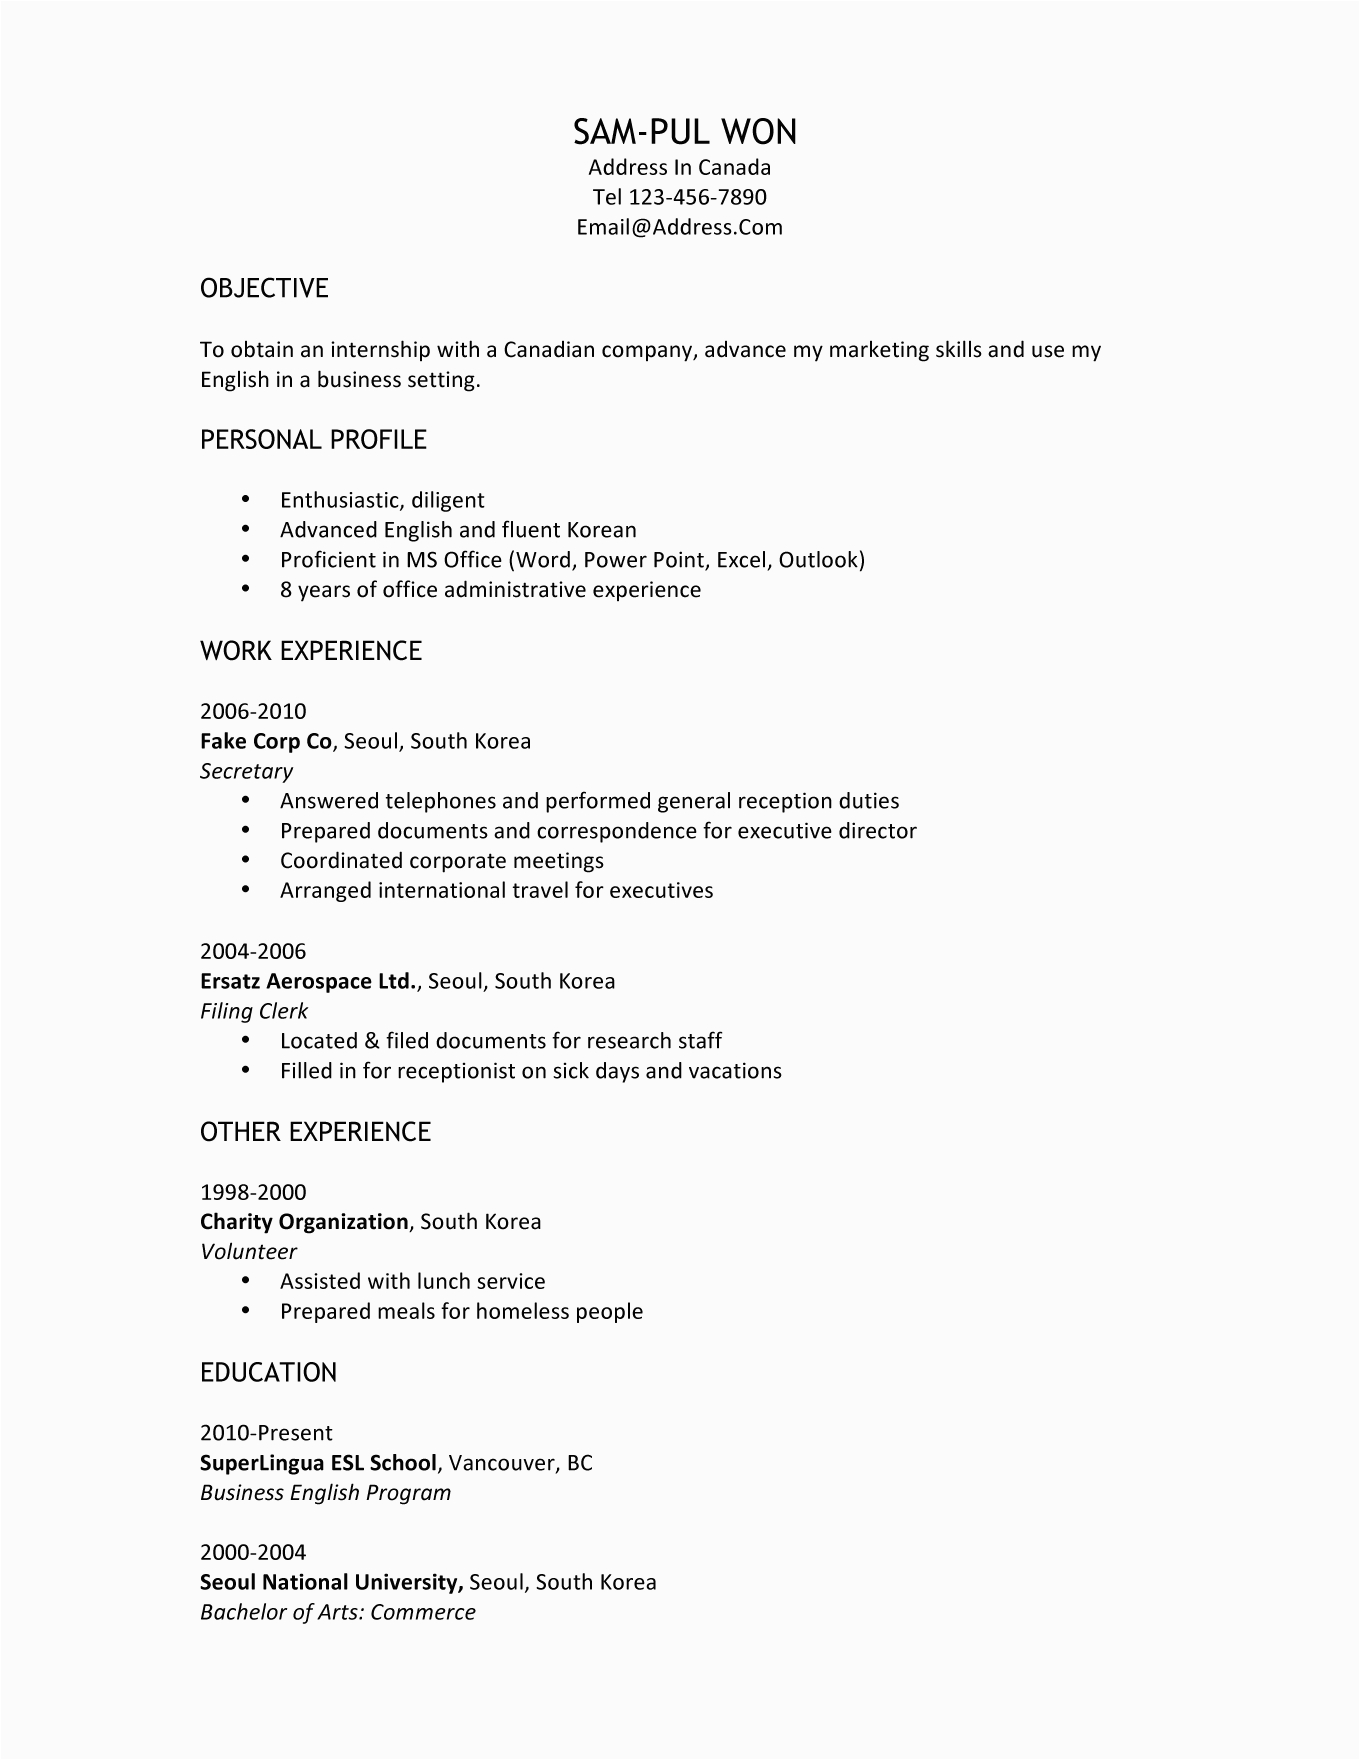 Resume Samples for International Students In Canada How to Write A Resume Work and Study Abroad